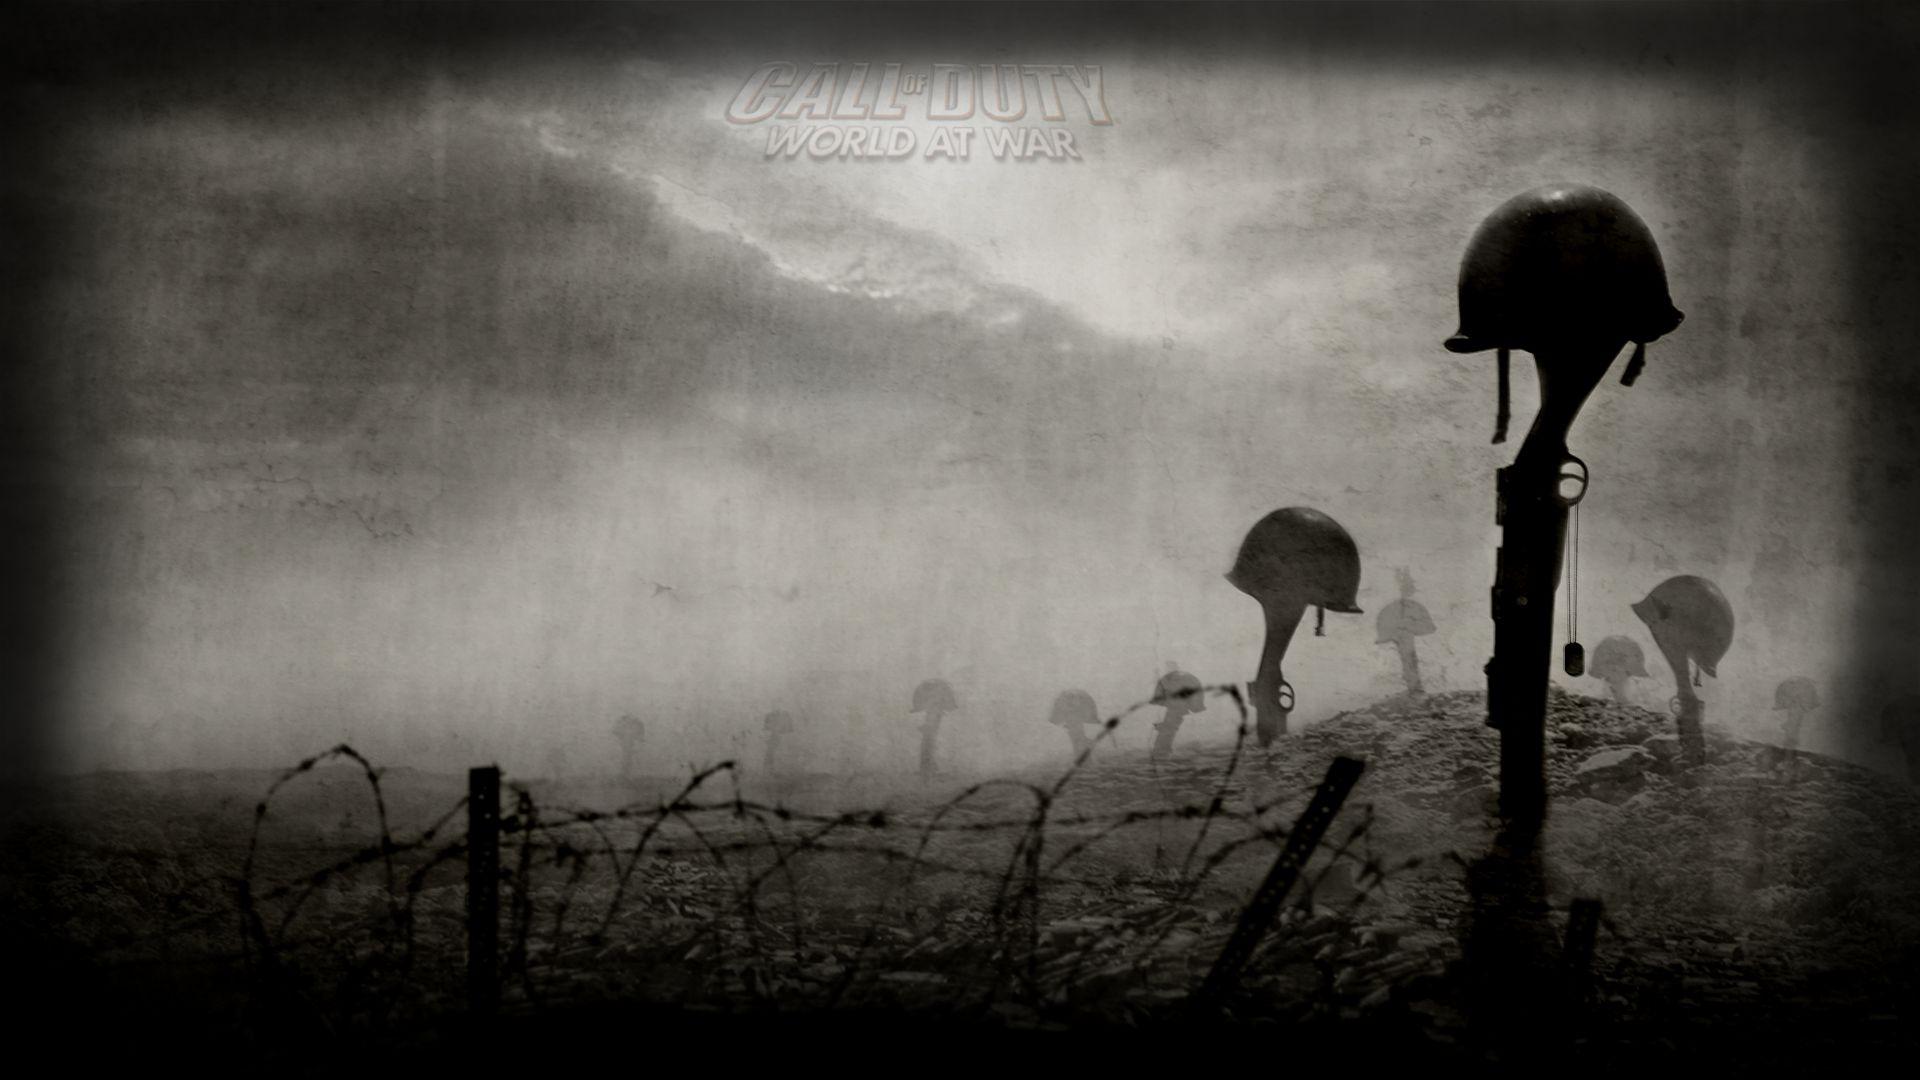 Video Game Call of Duty: World at War HD Wallpaper | Background Image